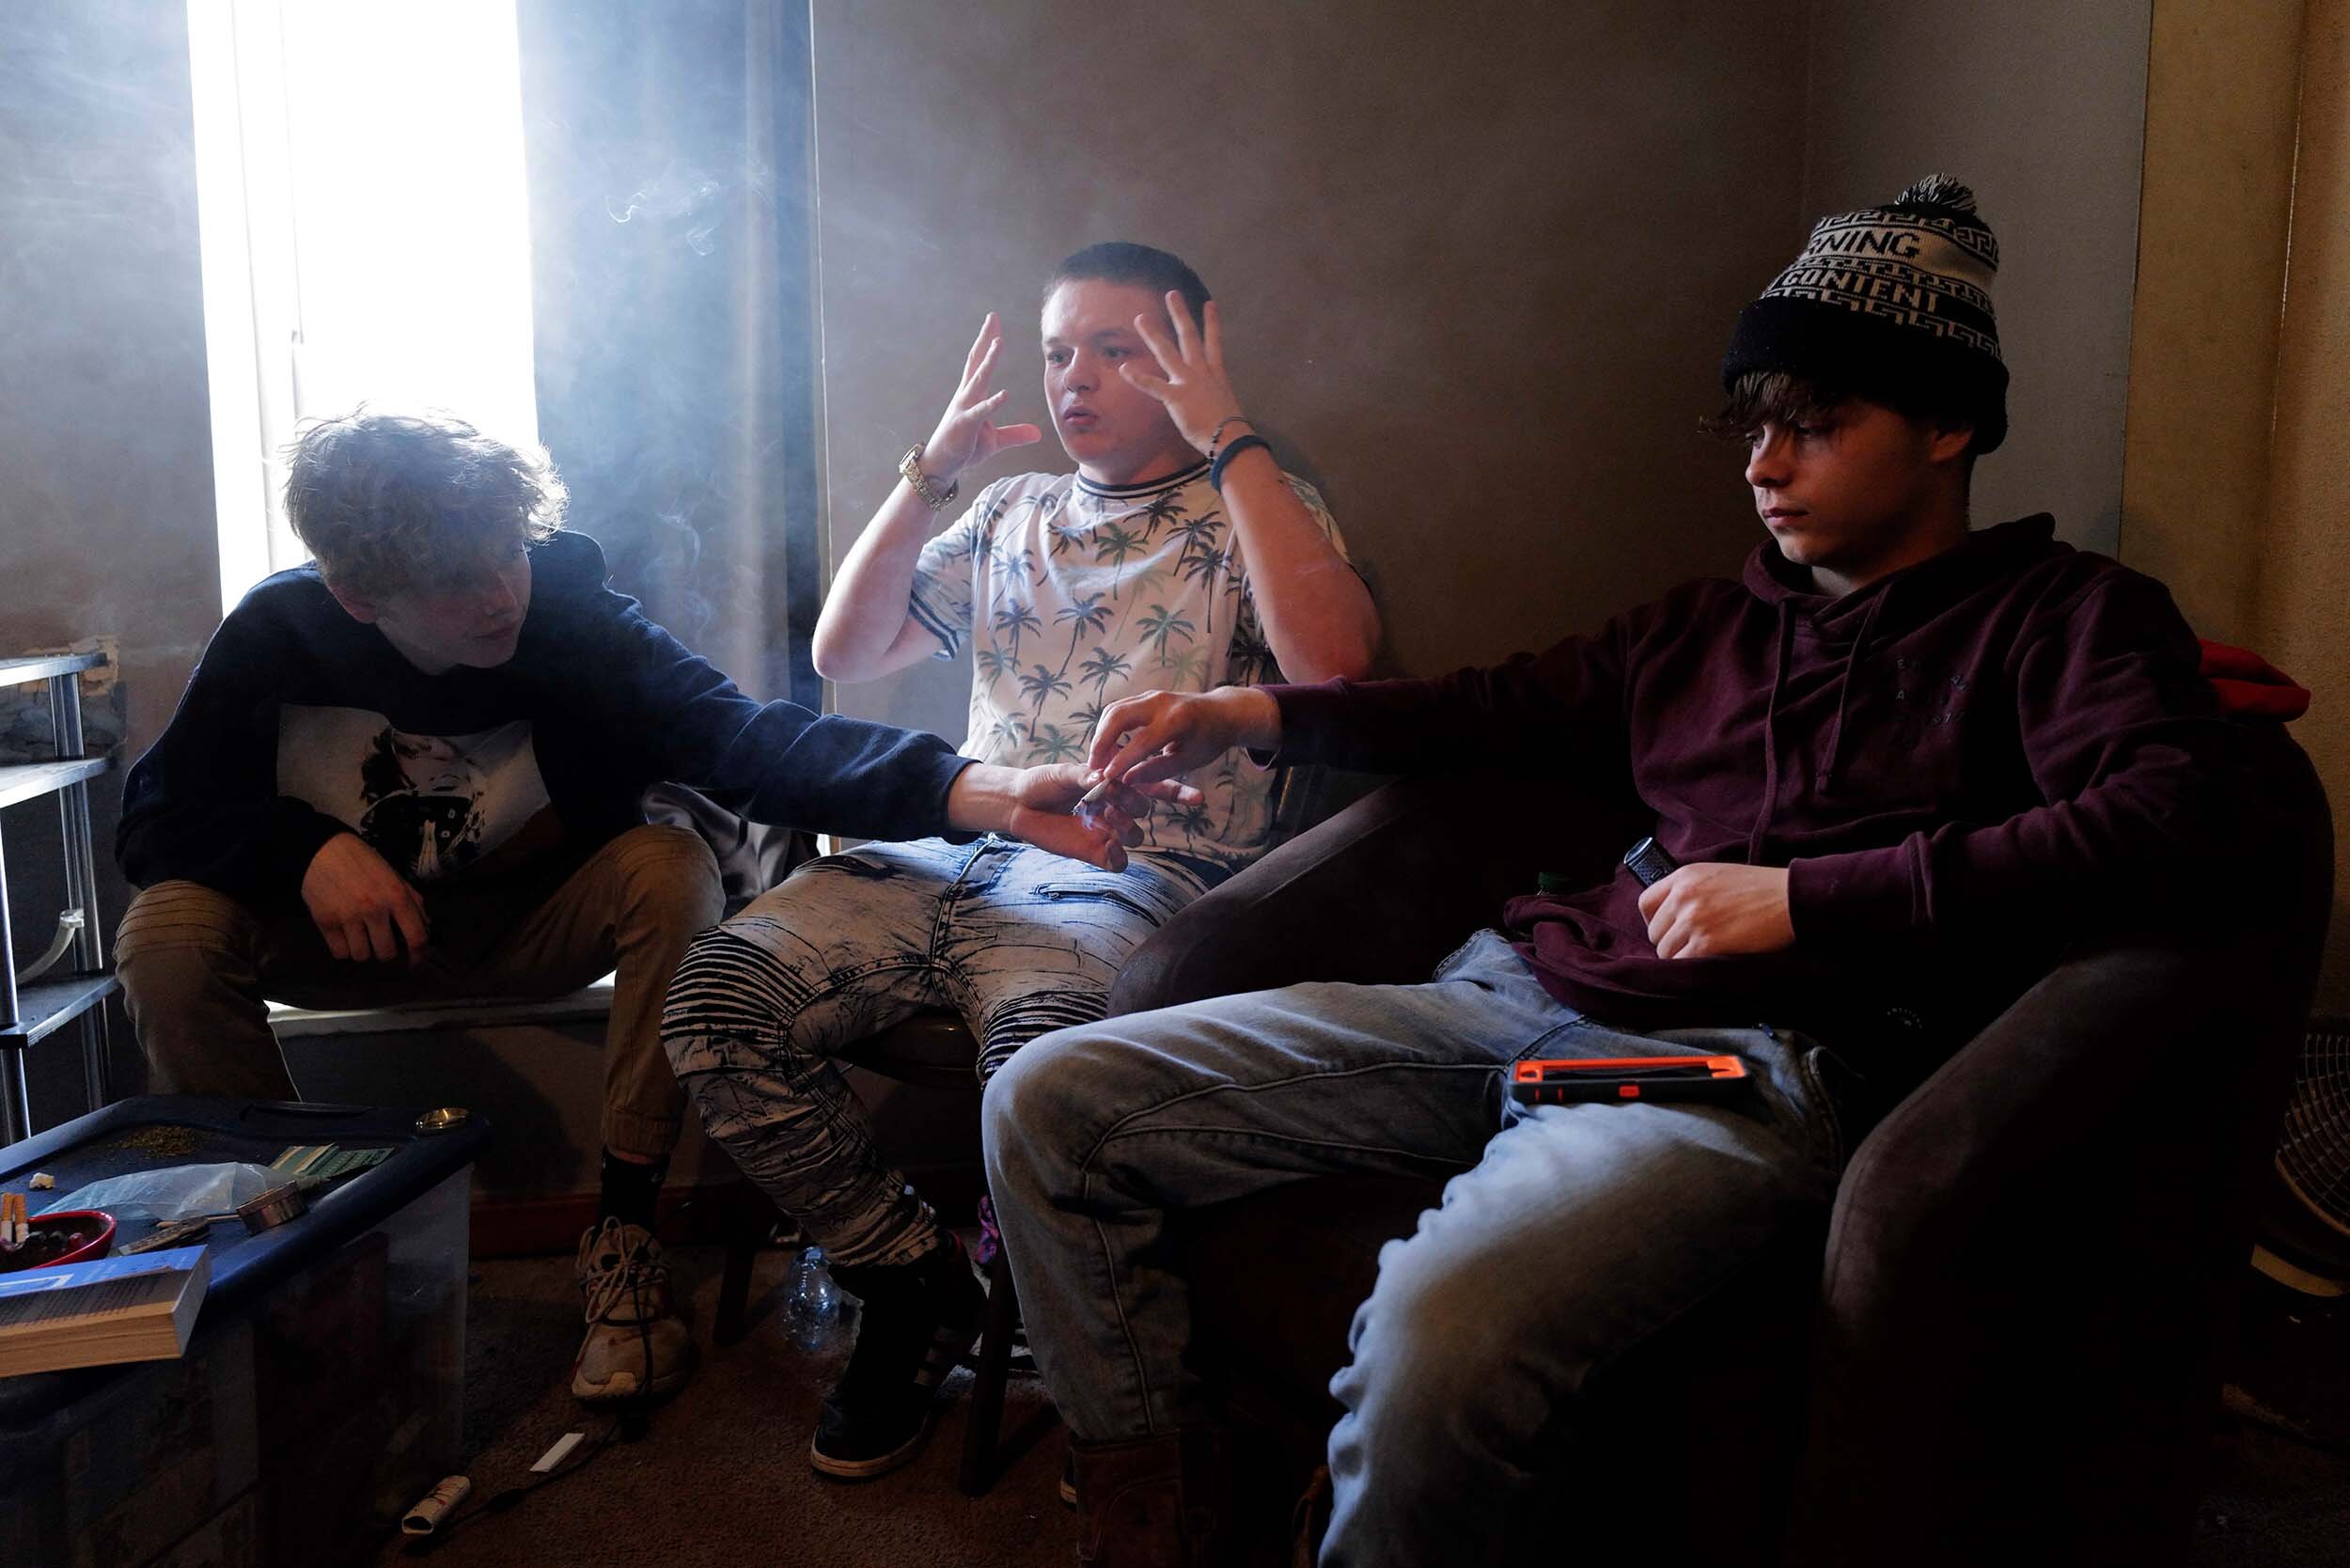  Reuben smokes a joint with his close friends (left) Damon McGee and (right) Ethan Rudder at Ben’s home in New Straitsville, Ohio, on March 26, 2021. “I think about what I had before compared to what I have right now and it's like, I had so much more